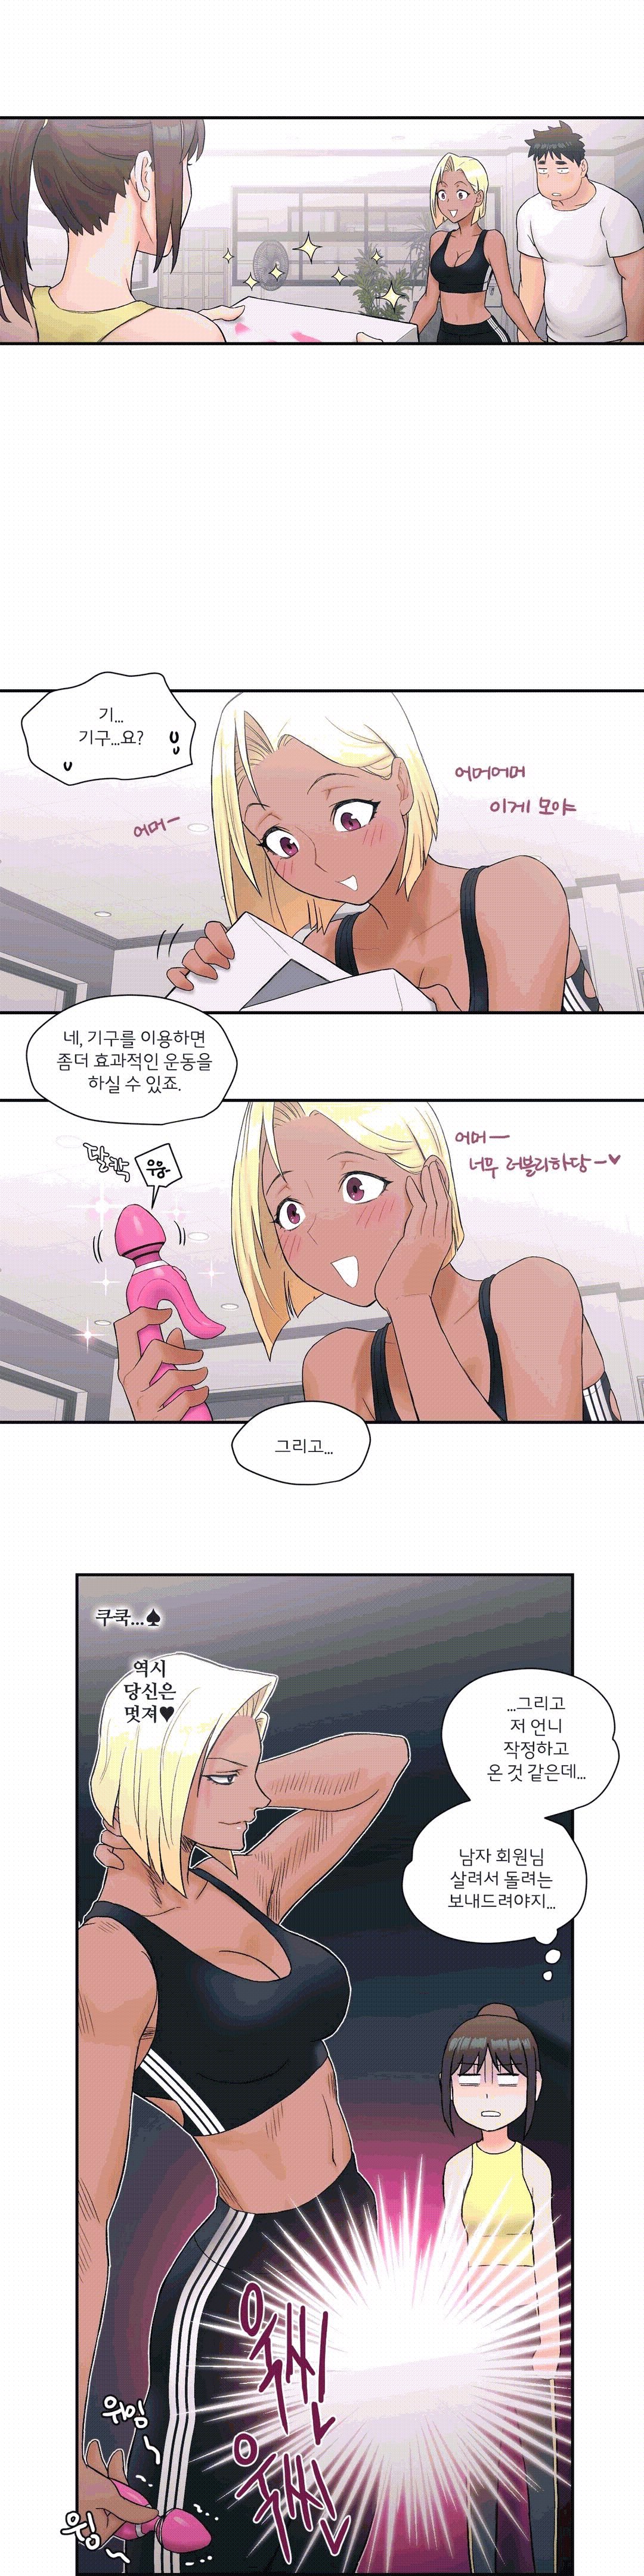 Sexercise Raw - Chapter 11 Page 16